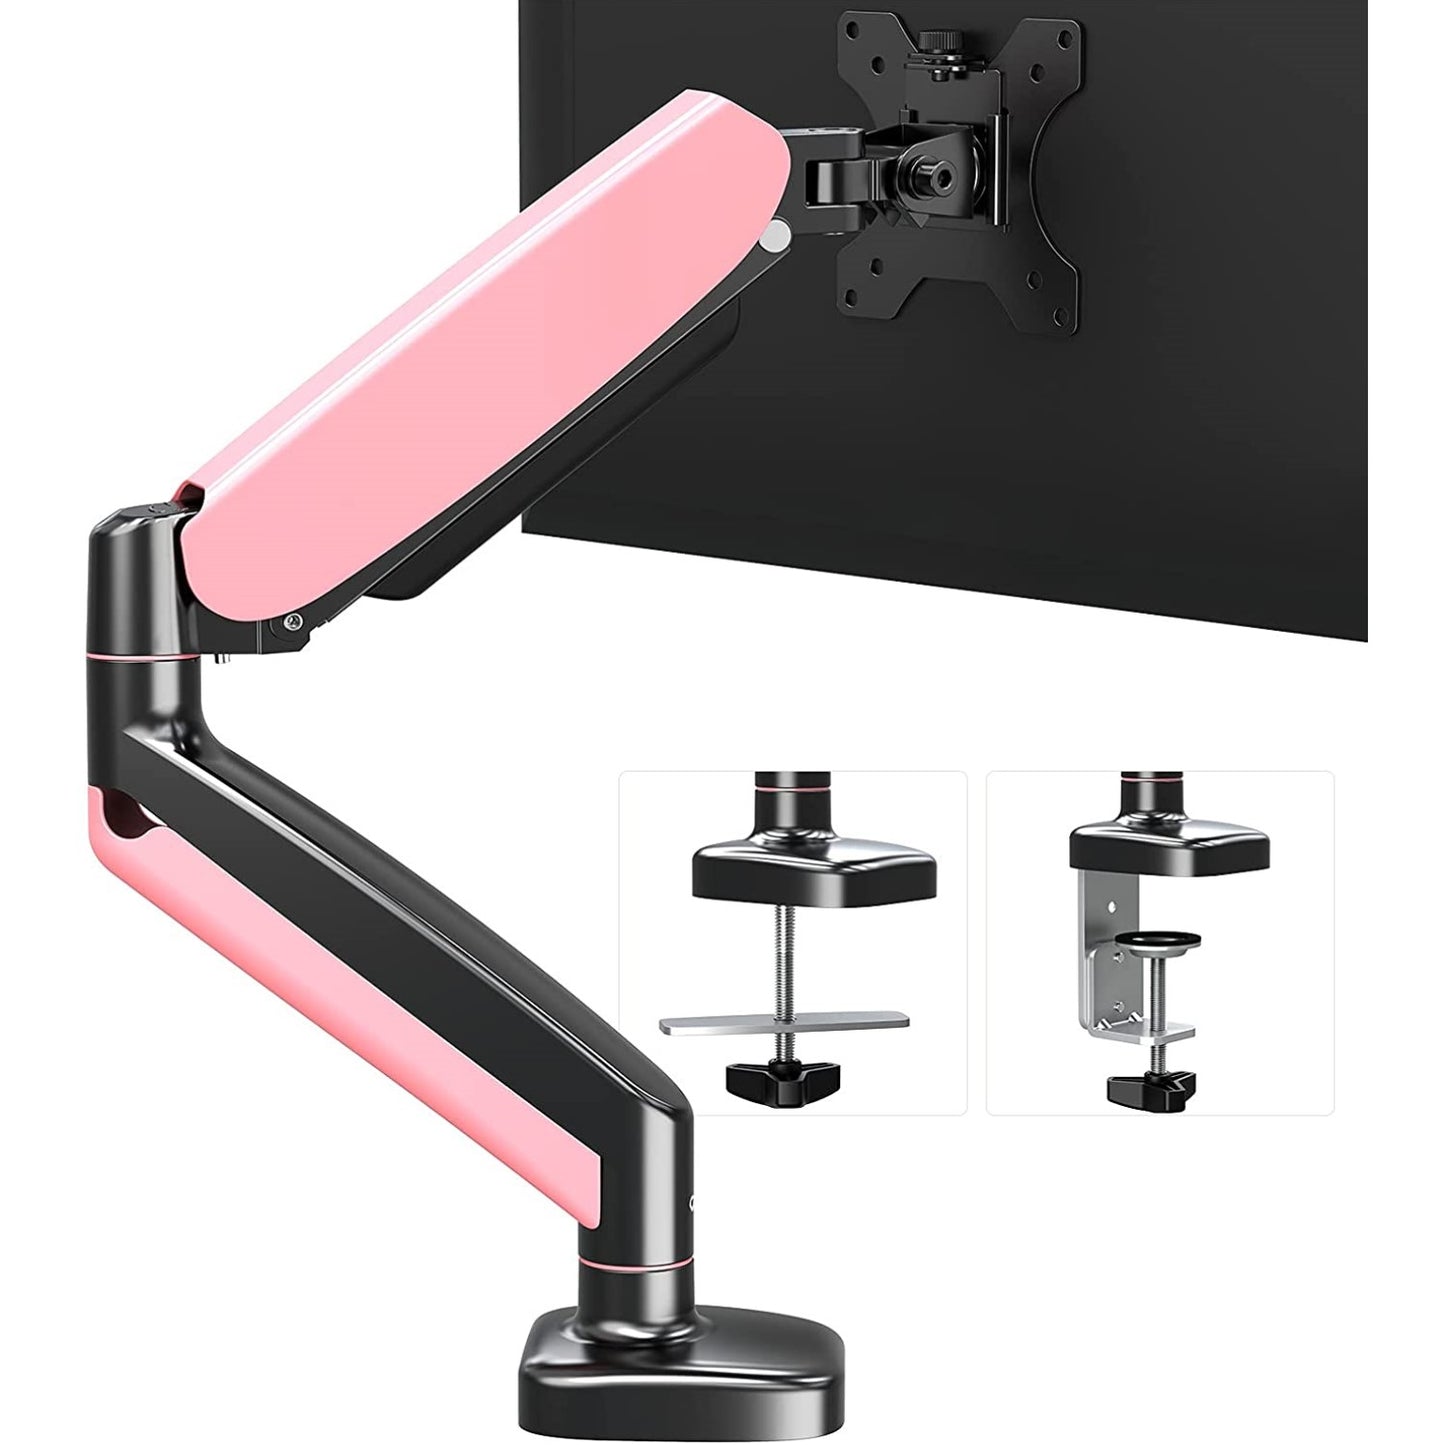 Single Arm Smatto Pink Monitor Desk Mount Stand for 17 to 32 inch LED LCD Screens